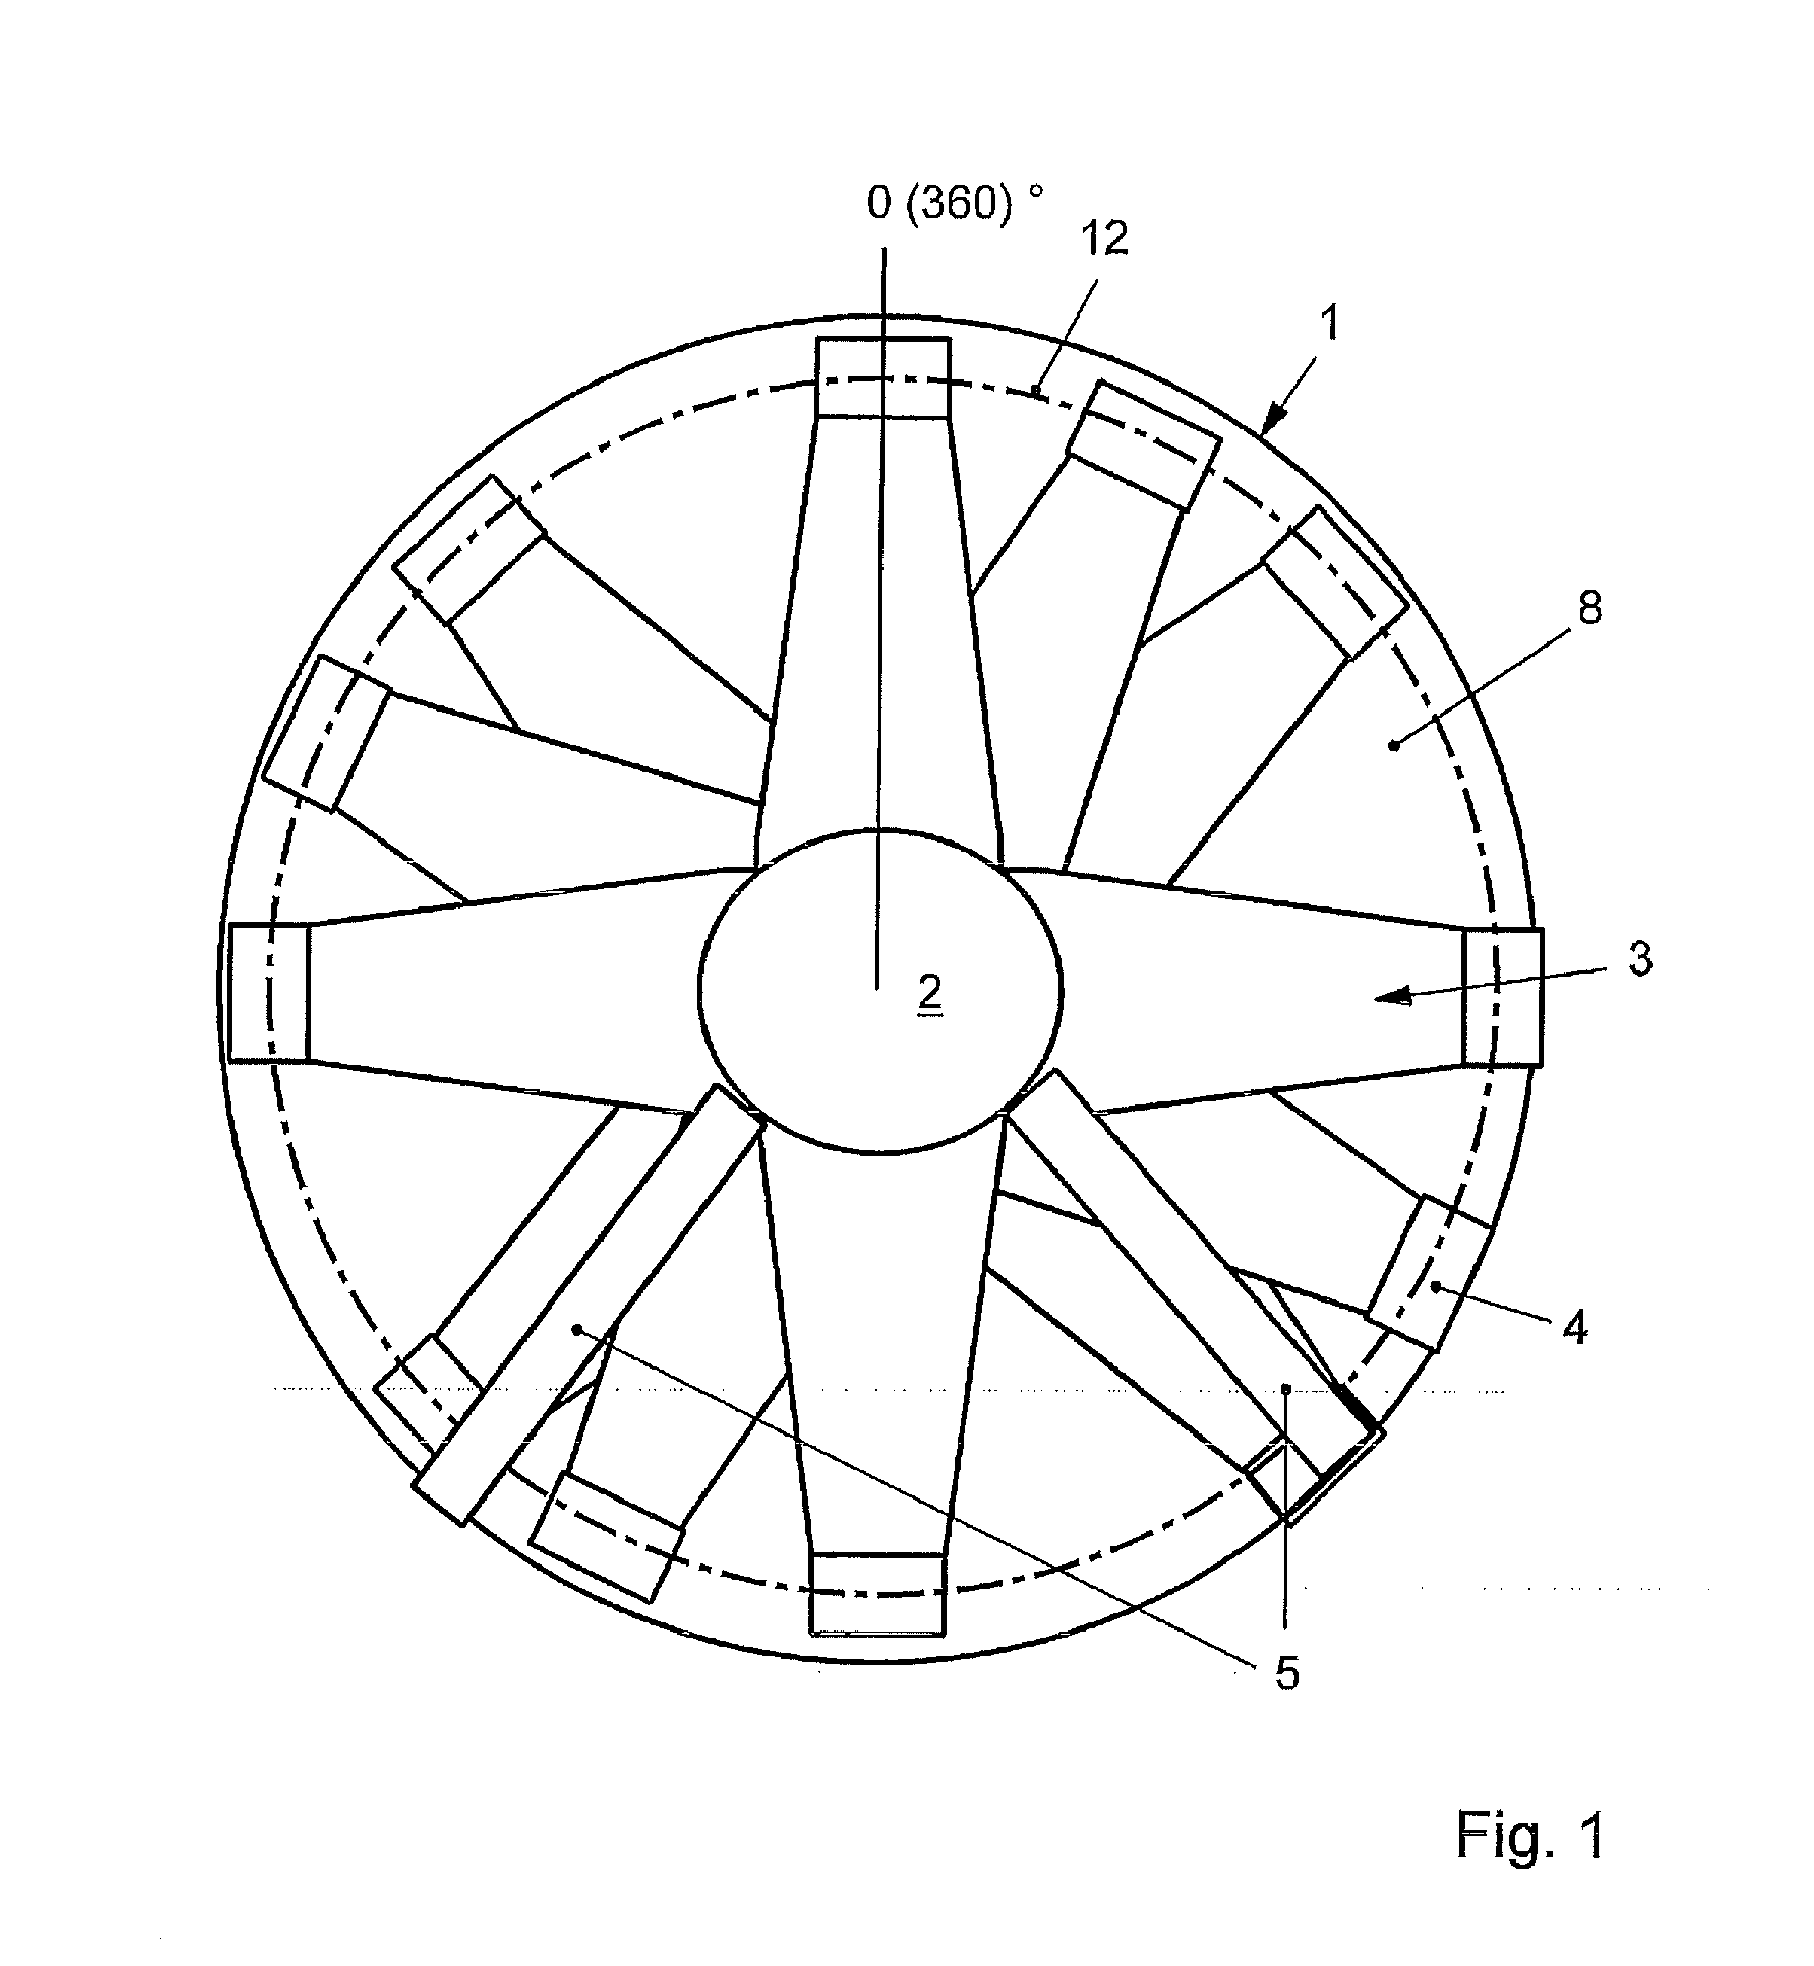 Device for transporting viscous compounds and pastes